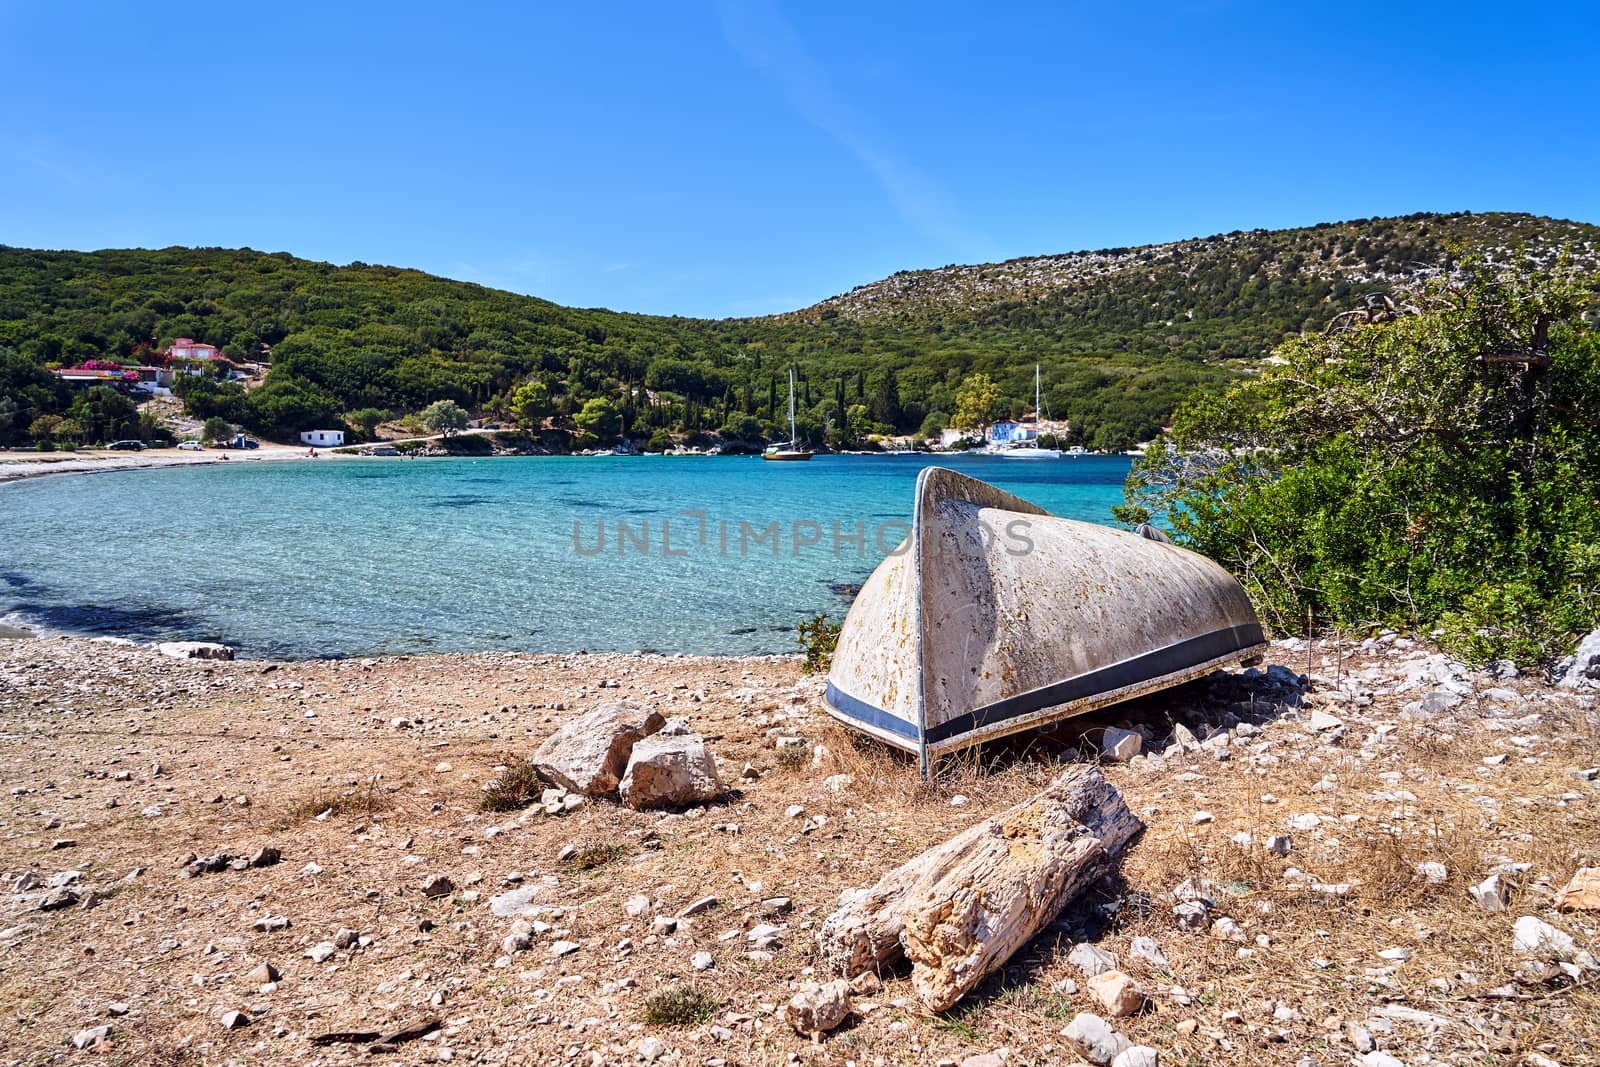 Destroyed boats in a rocky bay on the island of Kefalonia in Greece